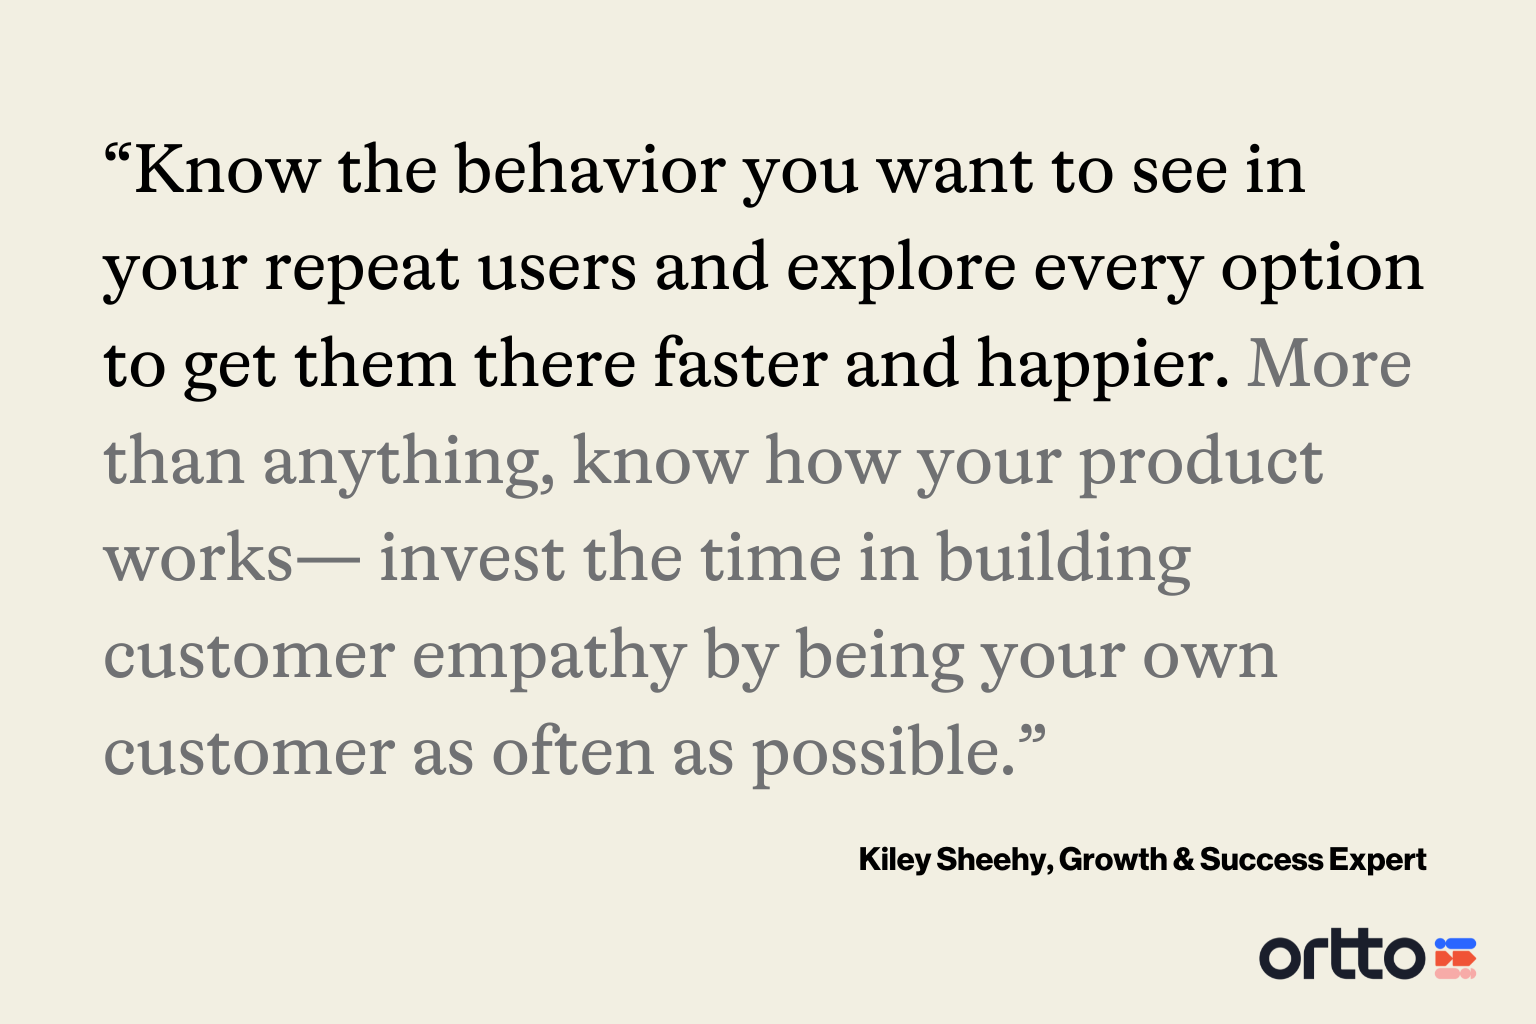 “Know the behavior you want to see in your repeat users and explore every option to get them there faster and happier. More than anything, know how your product works— invest the time building customer empathy by being your own customer as often as possible. Then, you'll know firsthand why a person might struggle to return, and you can fight the battle from the inside.”